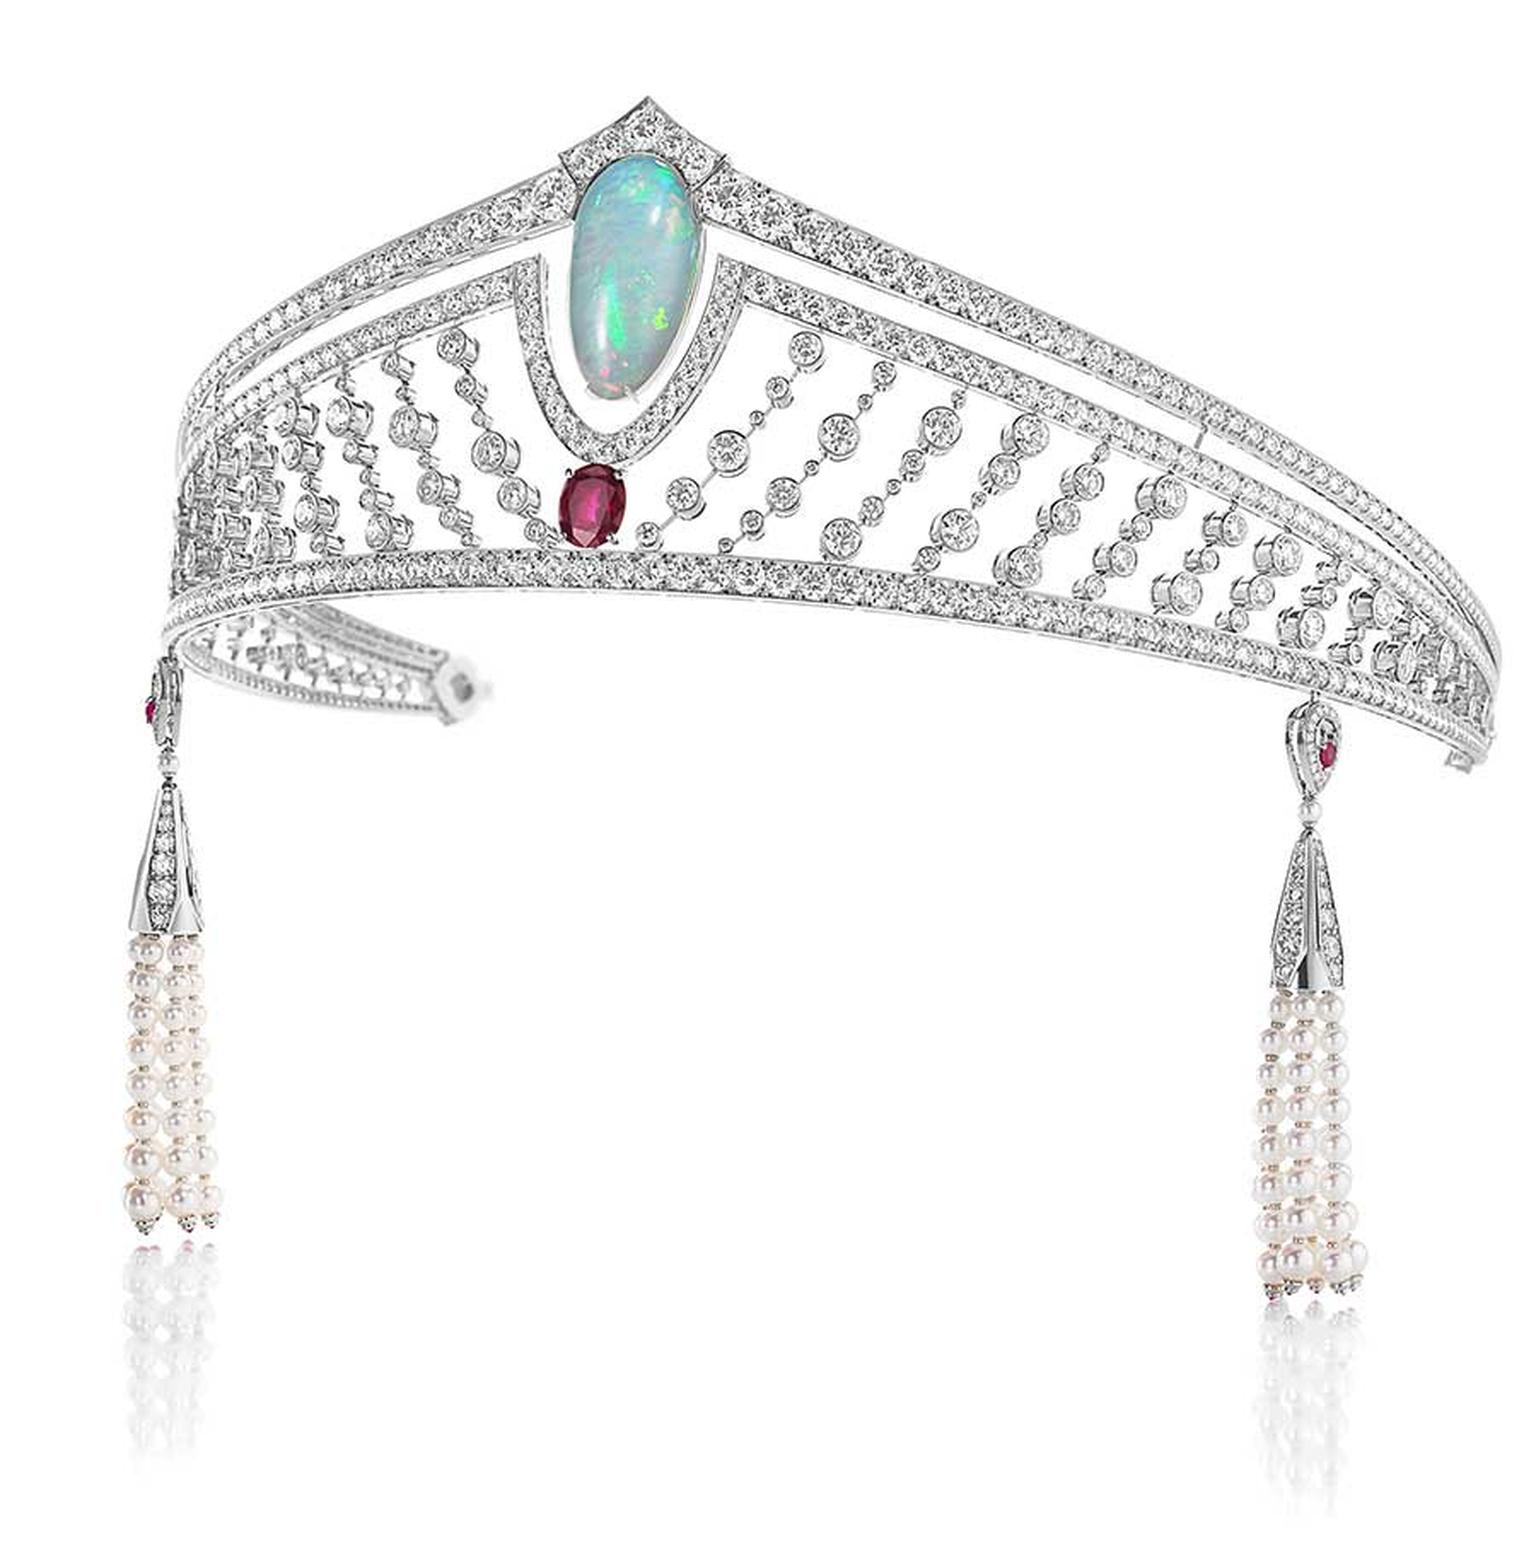 Chaumet's 12 Vendome opal tiara featuring emeralds, sapphires, rubies, purple jade and spinels surrounding a central opal.